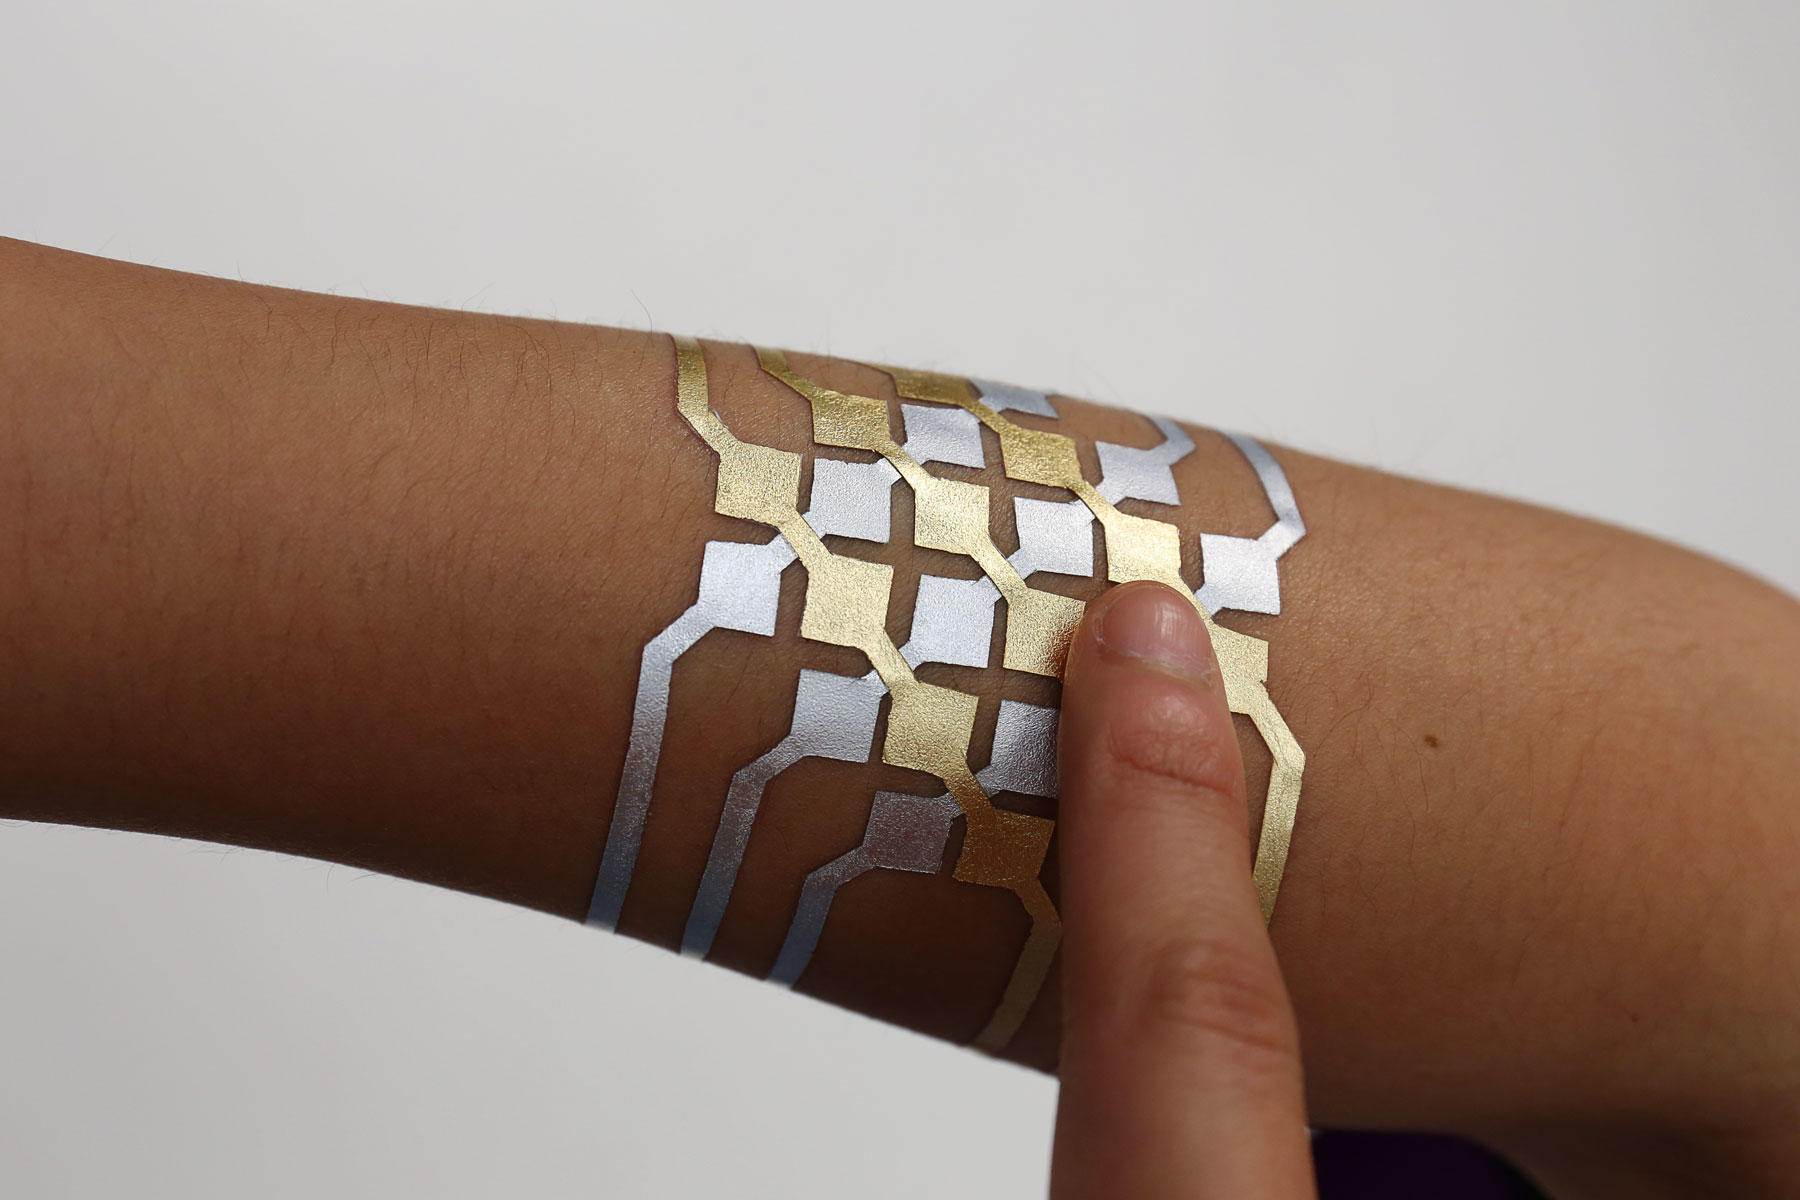 Microsofts MITs gold tattoos turn your skin into a UI for your phone   ZDNET